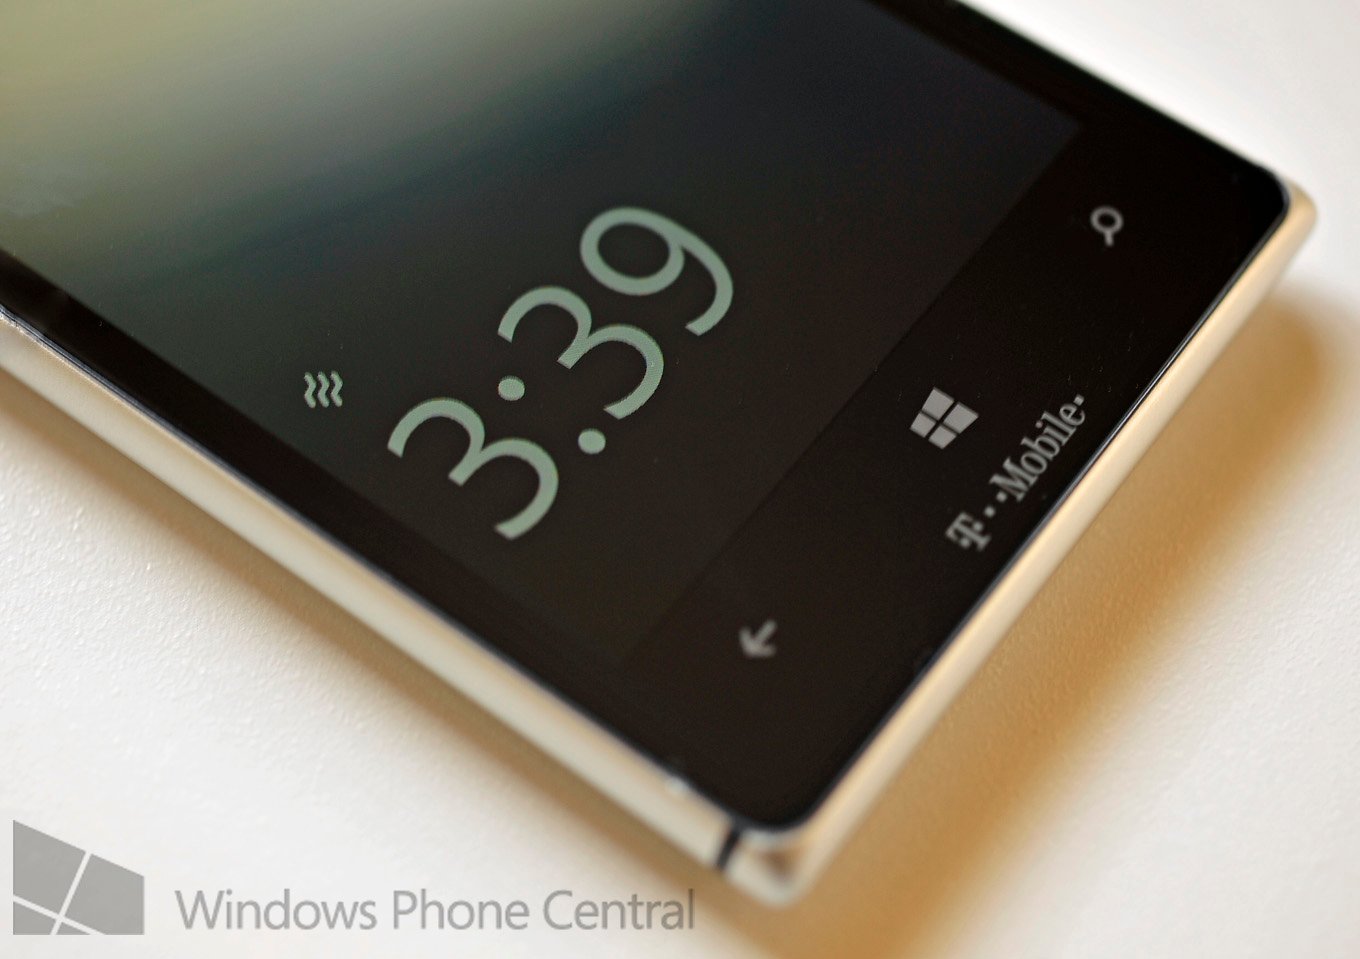 Nokia Glance screen with clock